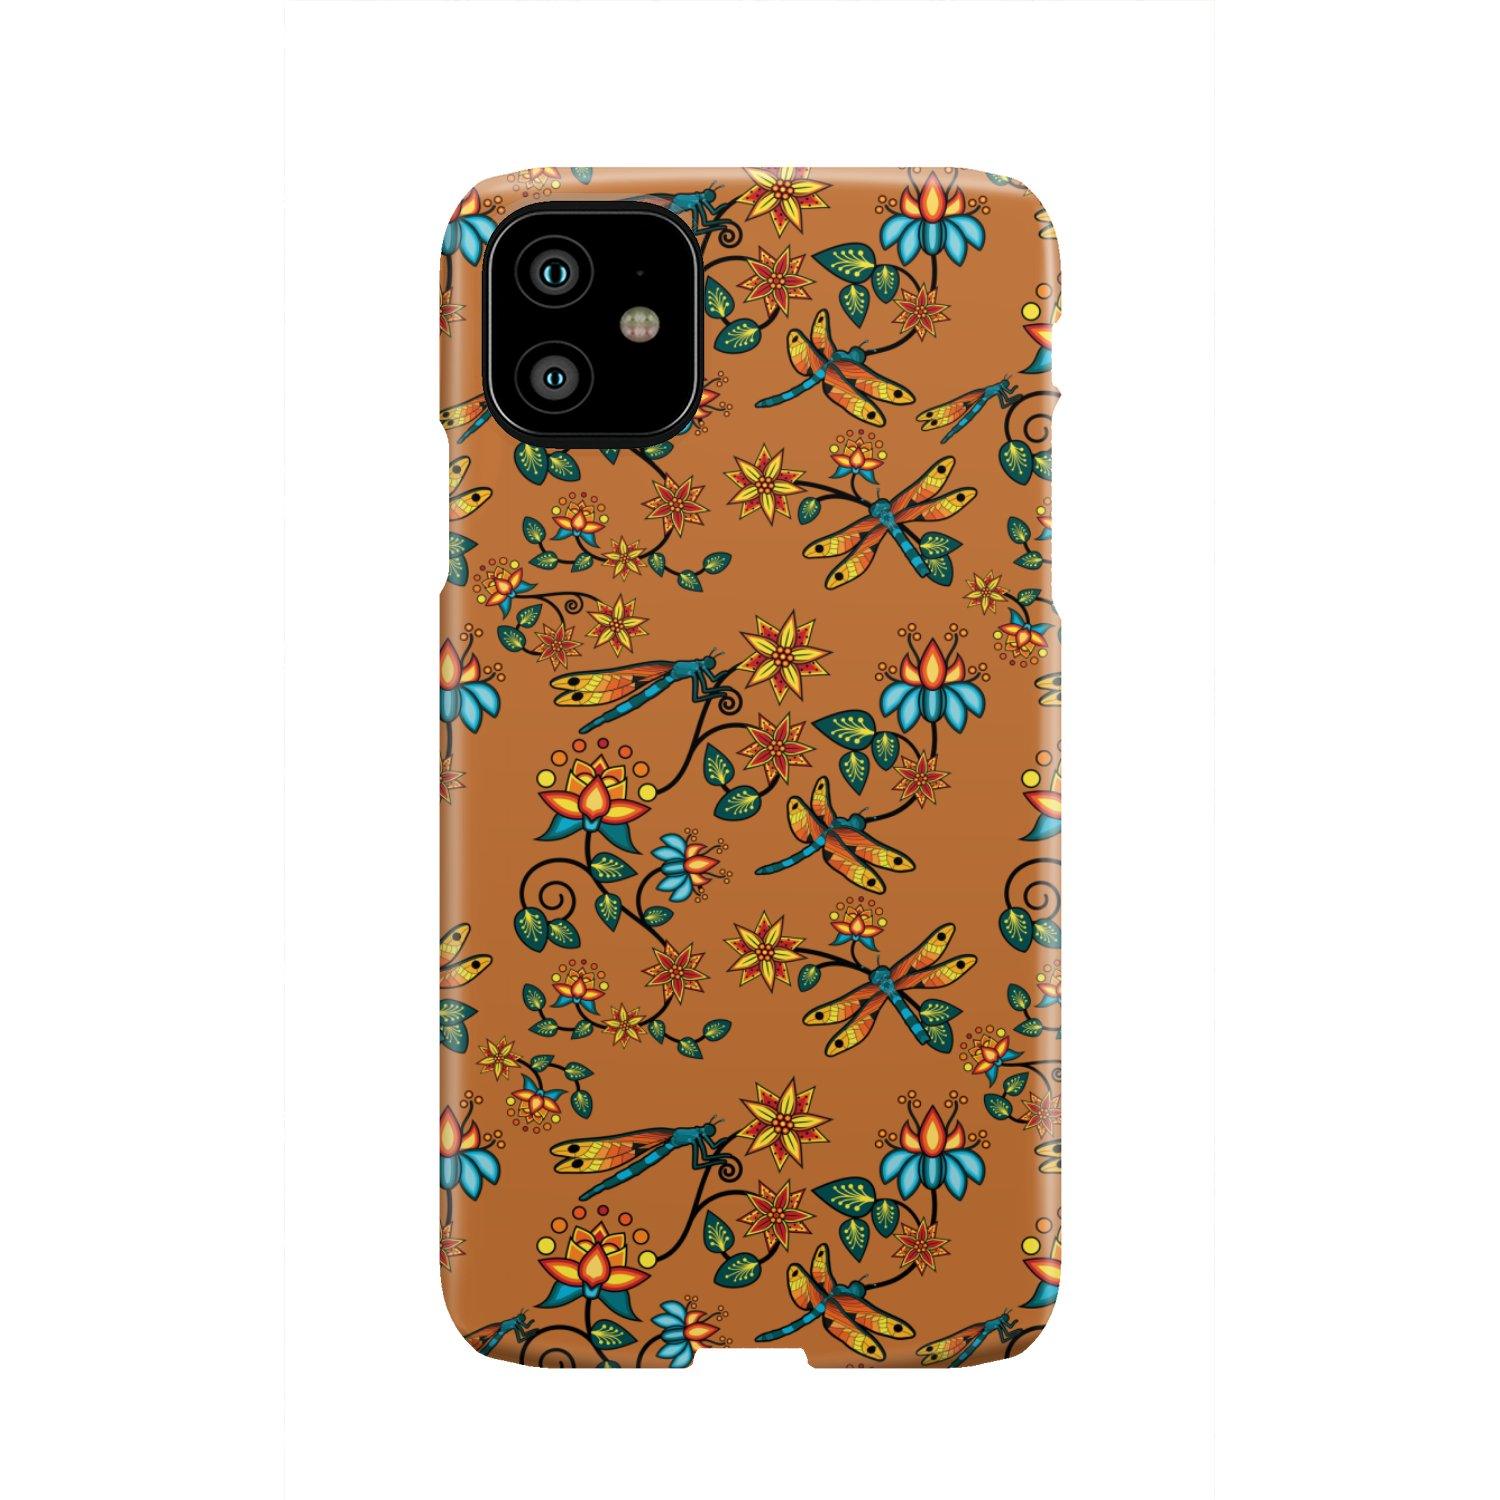 Dragon Lily Sierra Phone Case Phone Case wc-fulfillment iPhone 11 